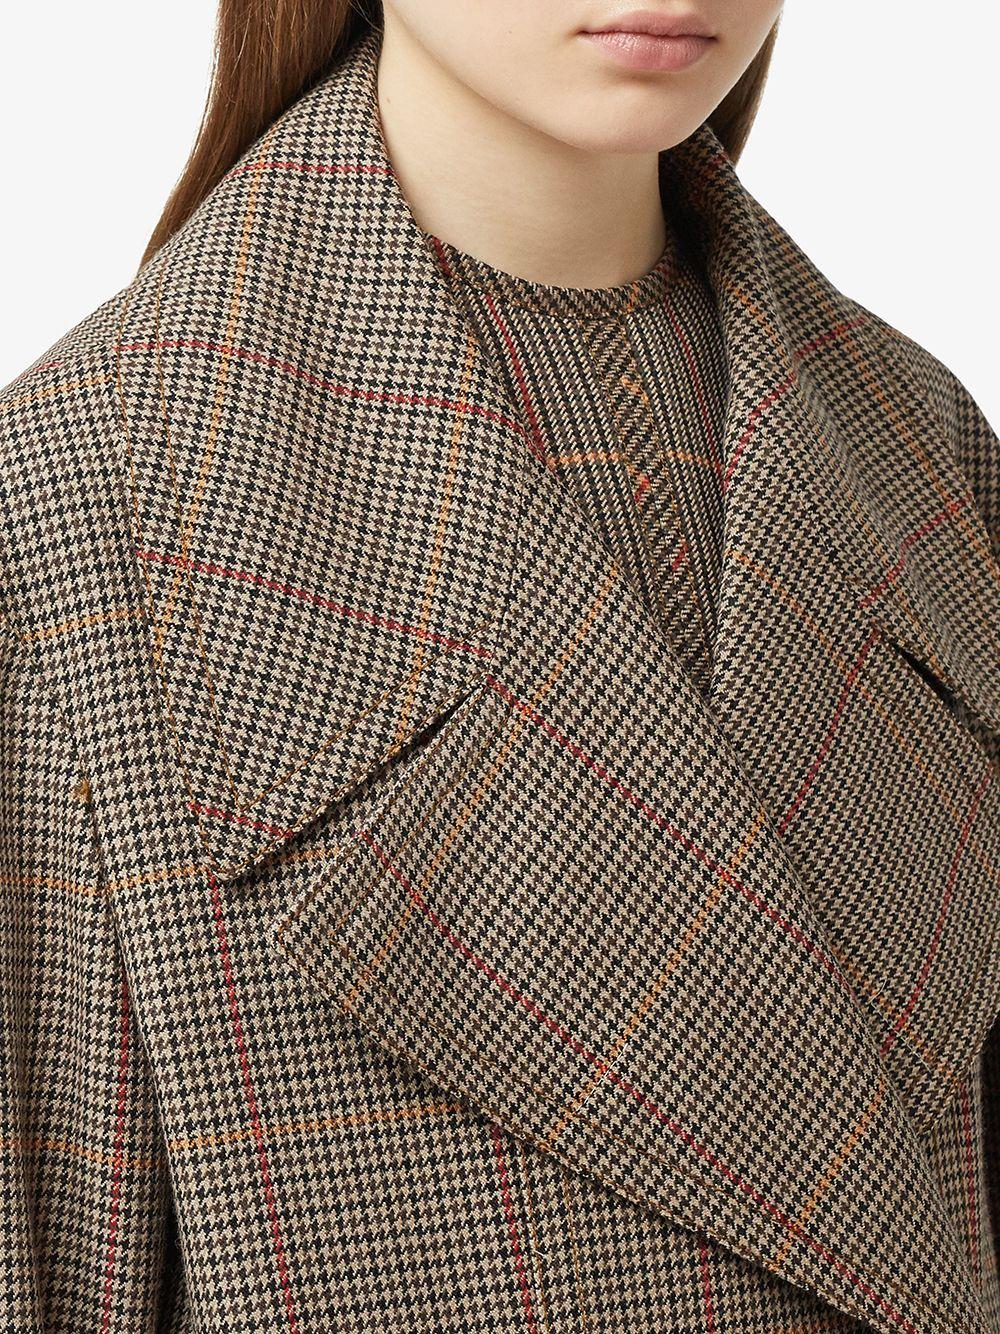 Burberry Houndstooth Check Wool Double-breasted Coat in Natural | Lyst